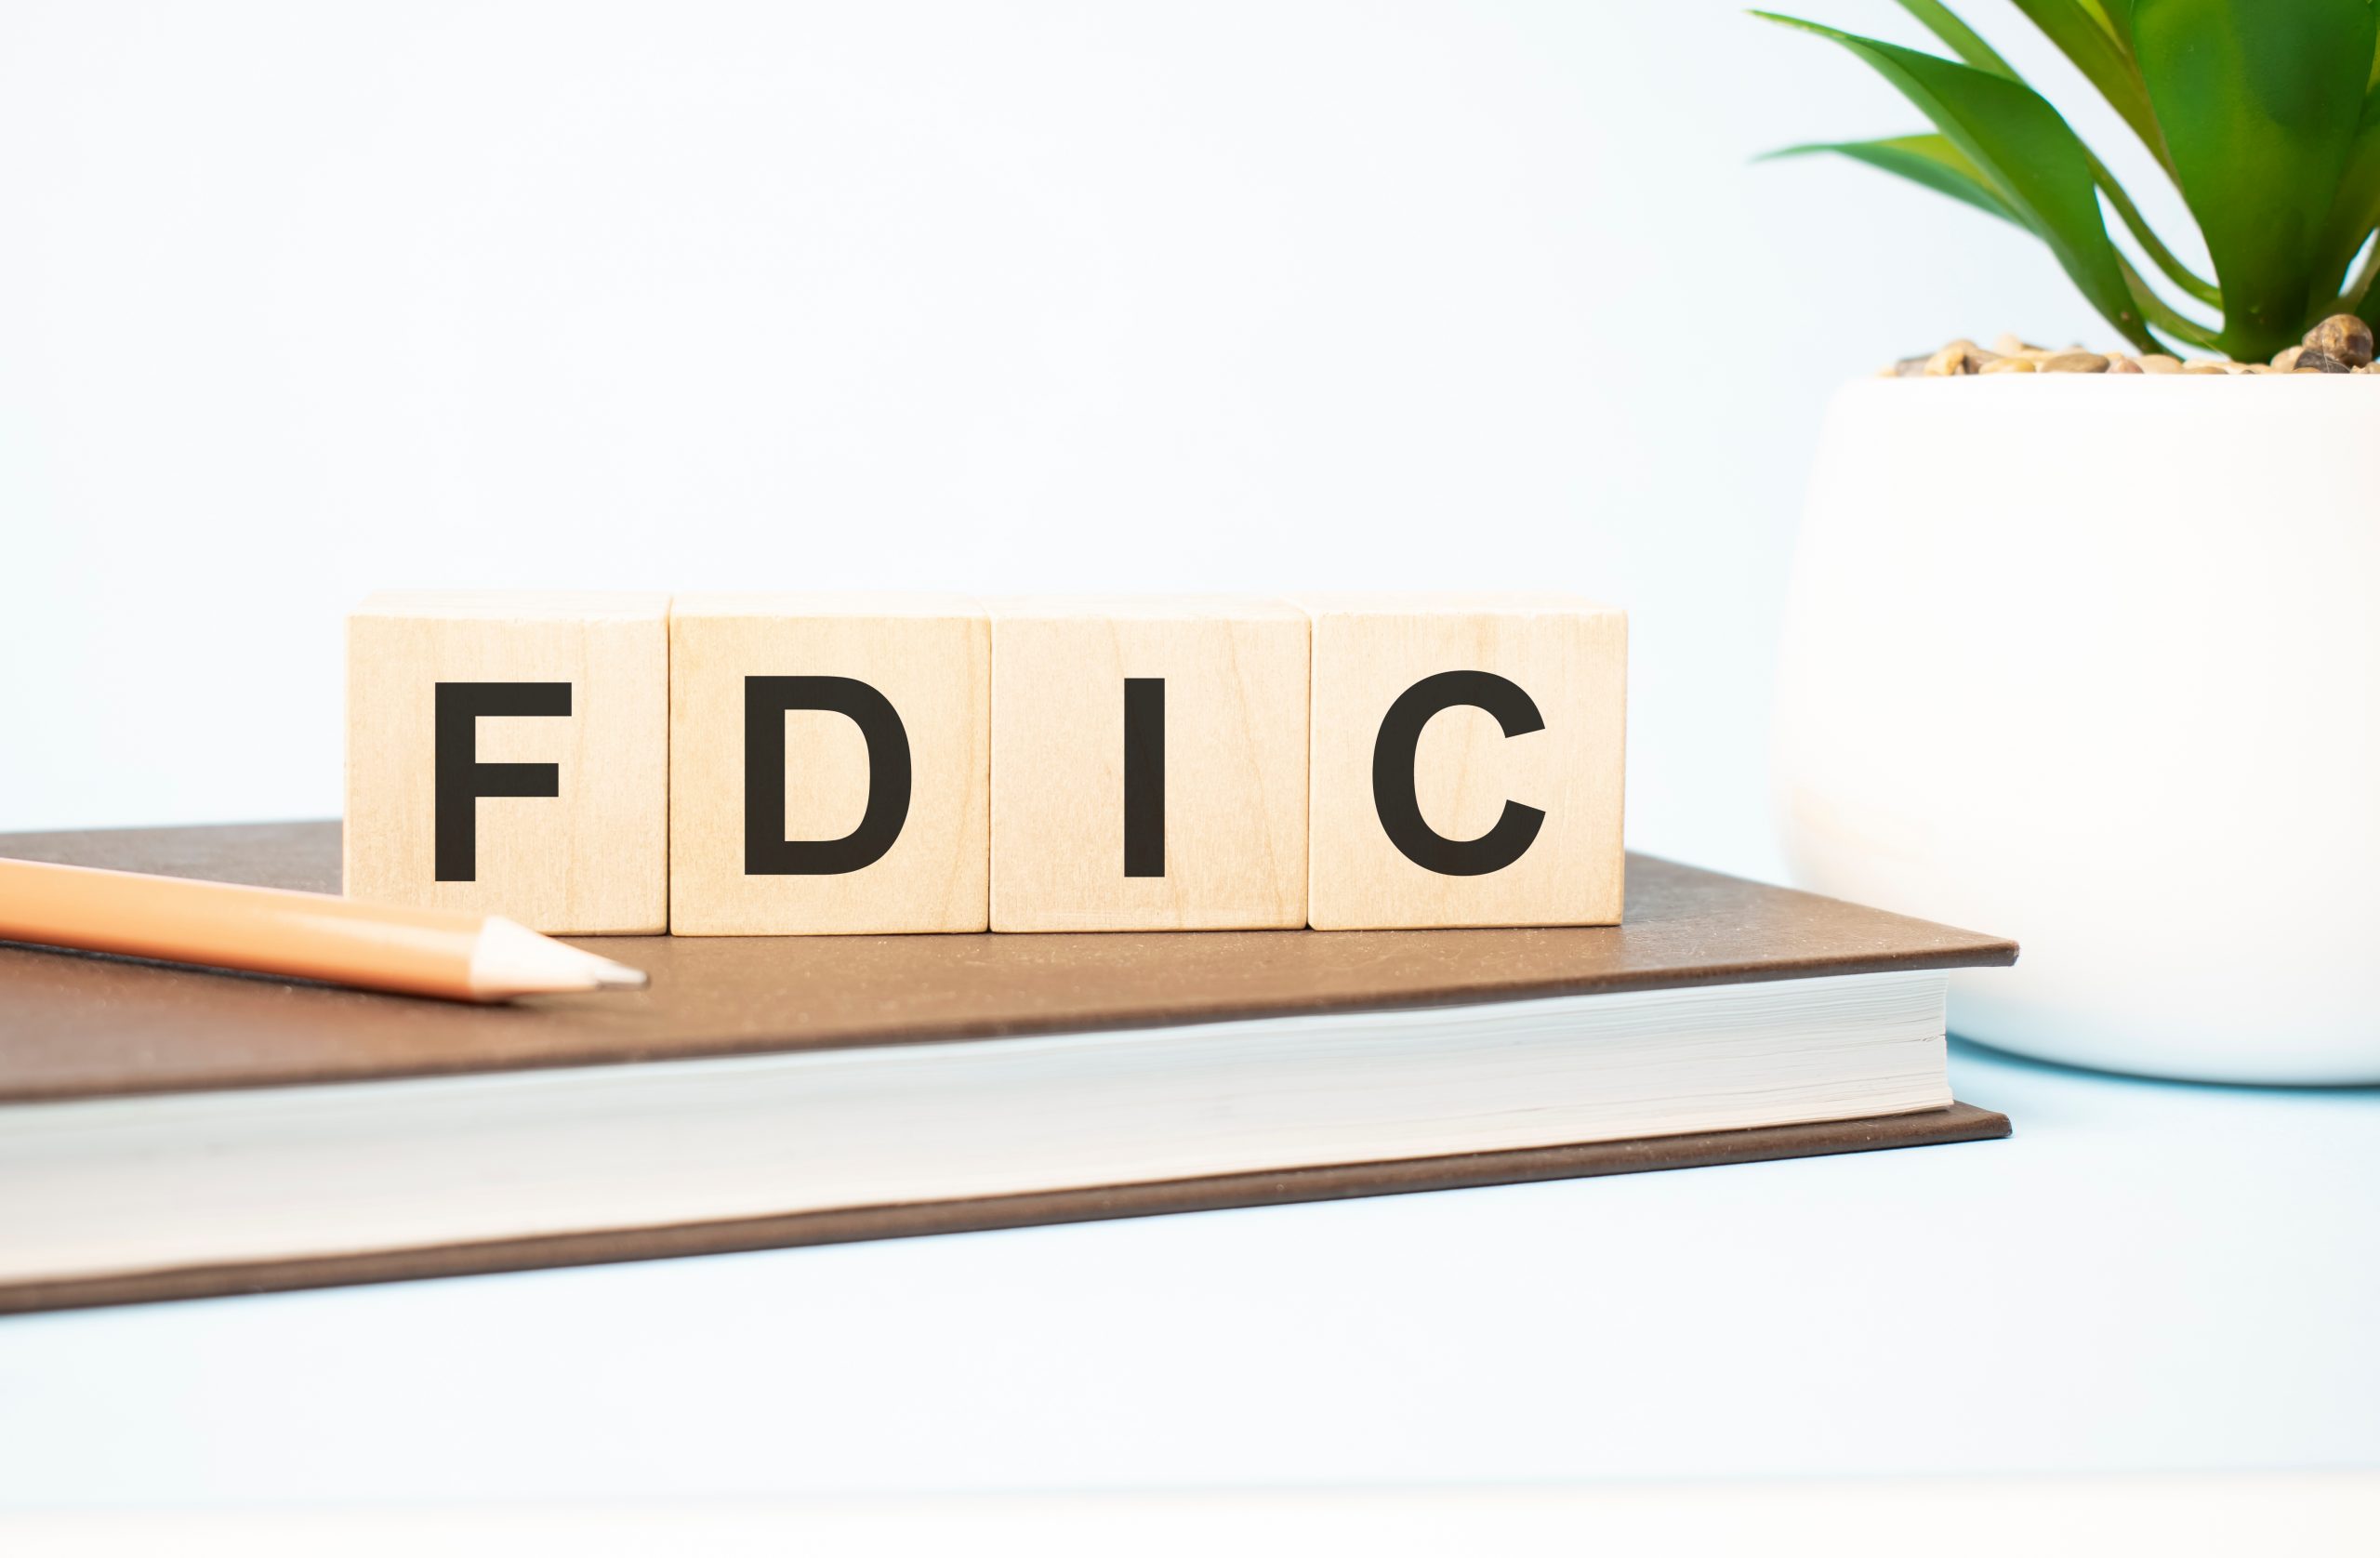 FDIC Insurance: What is It and What Are the Coverage Limits?